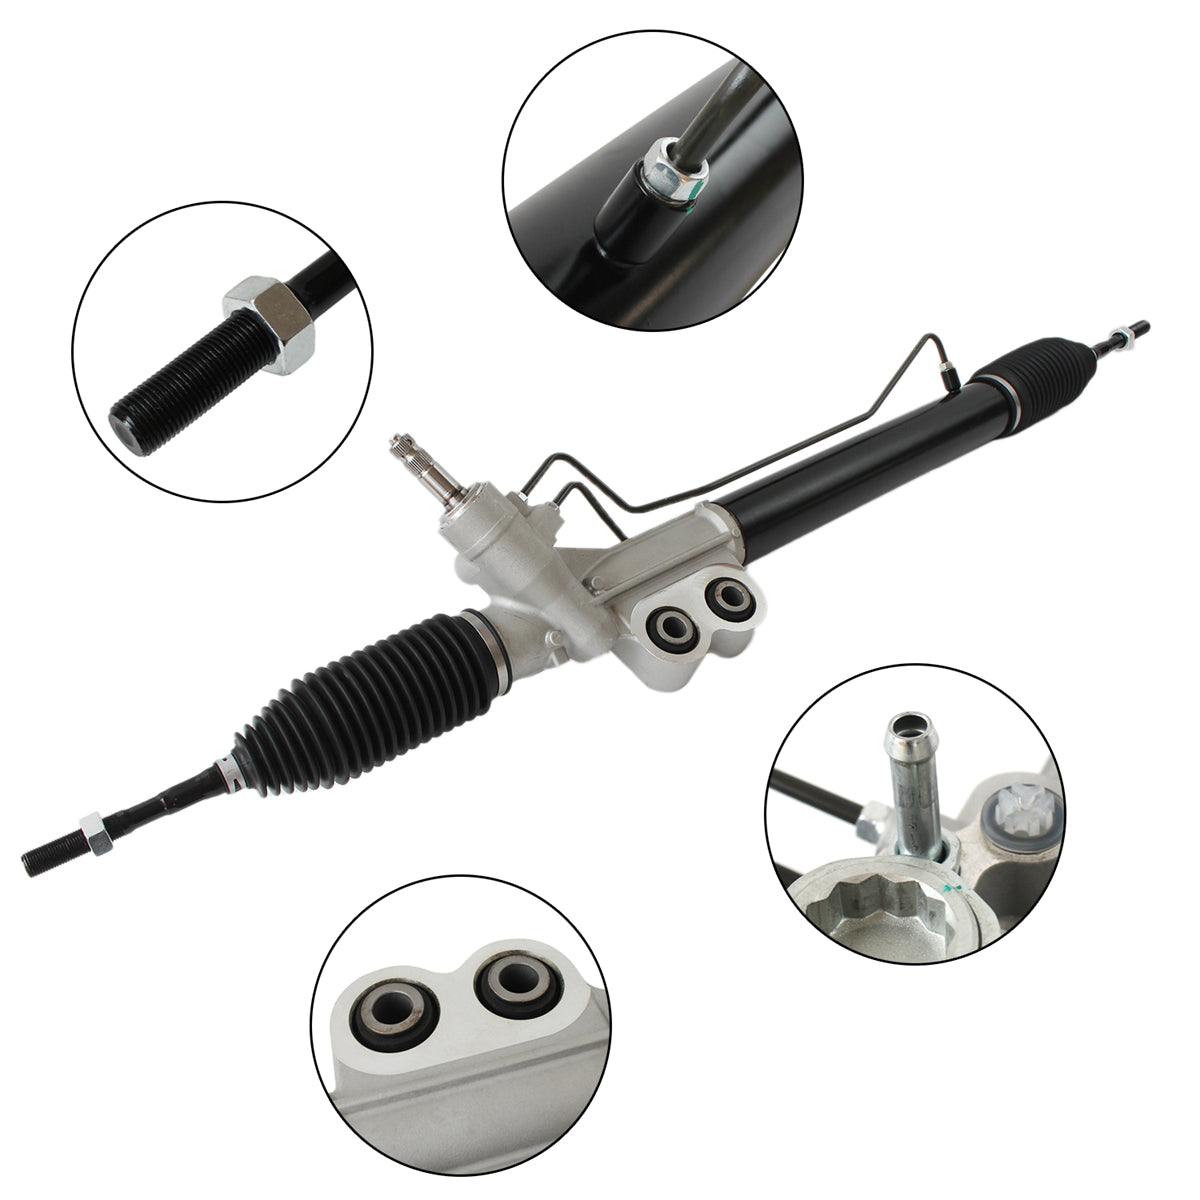 Daysyore® Power Steering Rack and Pinion for Nissan Frontier Pathfinder Xterra 26-3033